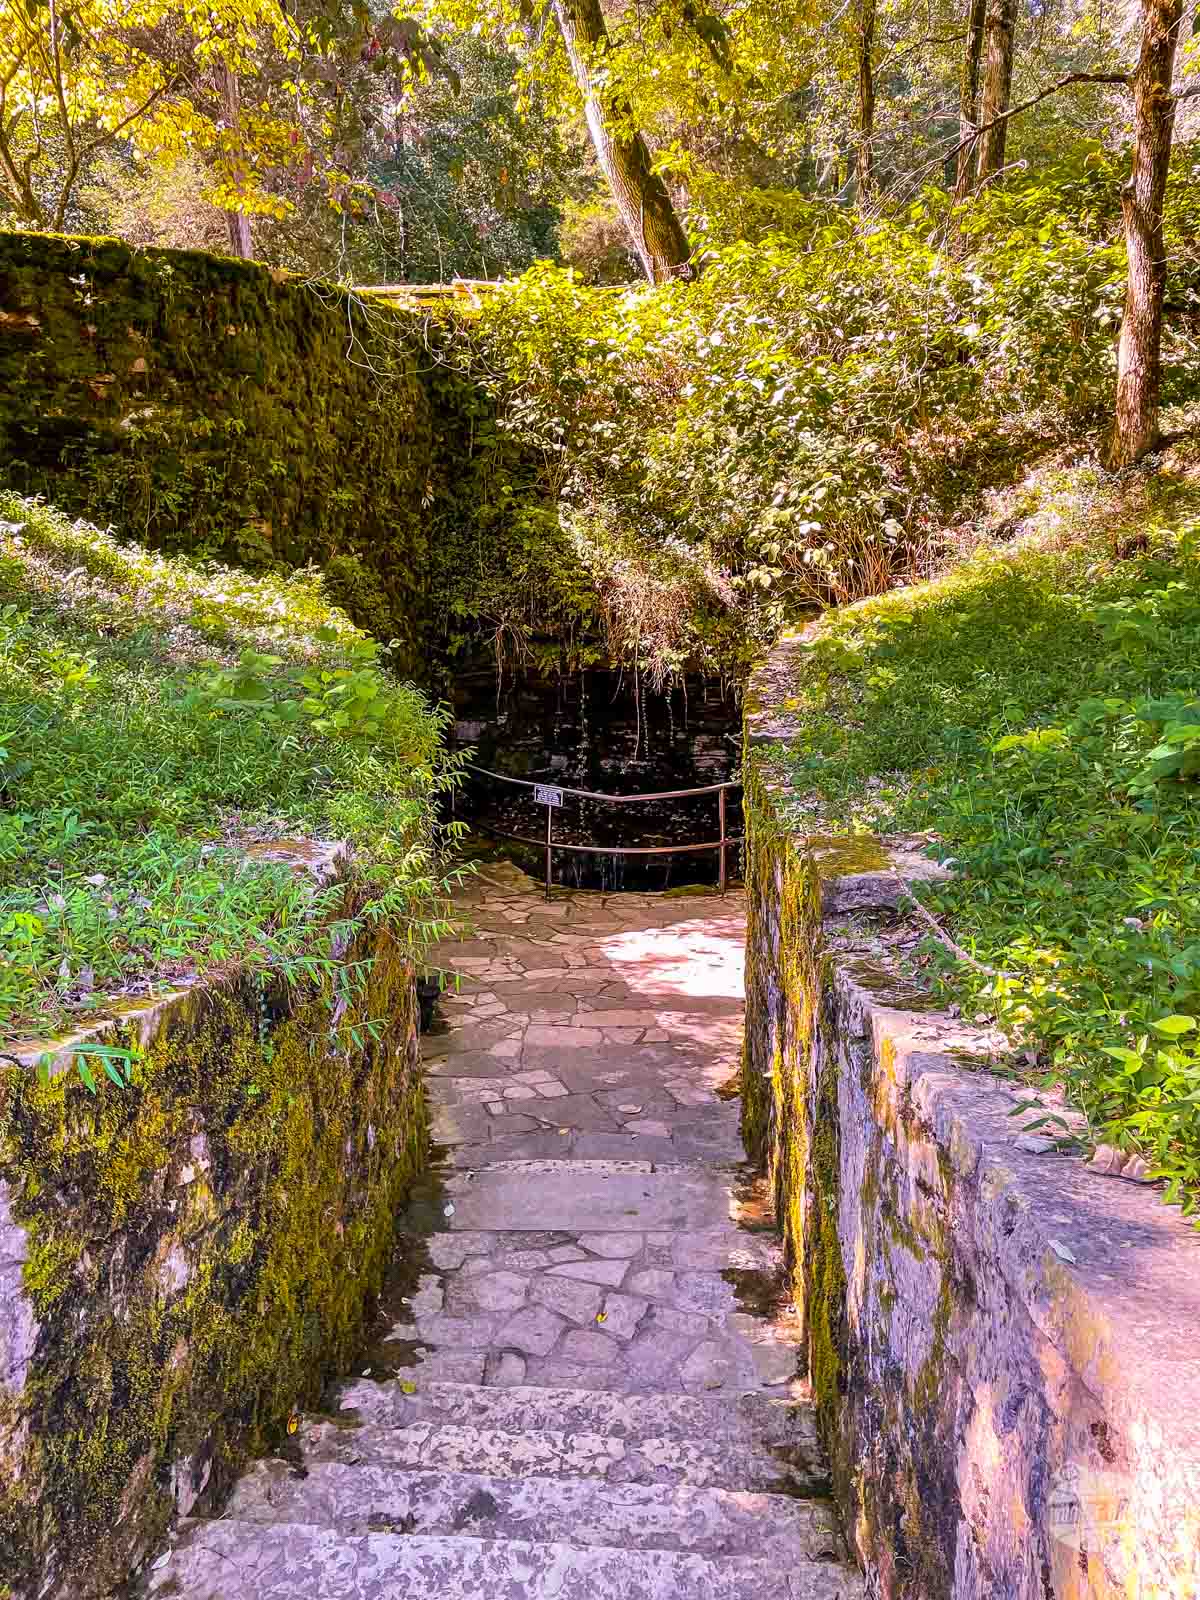 The Sunken Spring at the Abraham Lincoln Birthplace National Historical Park.